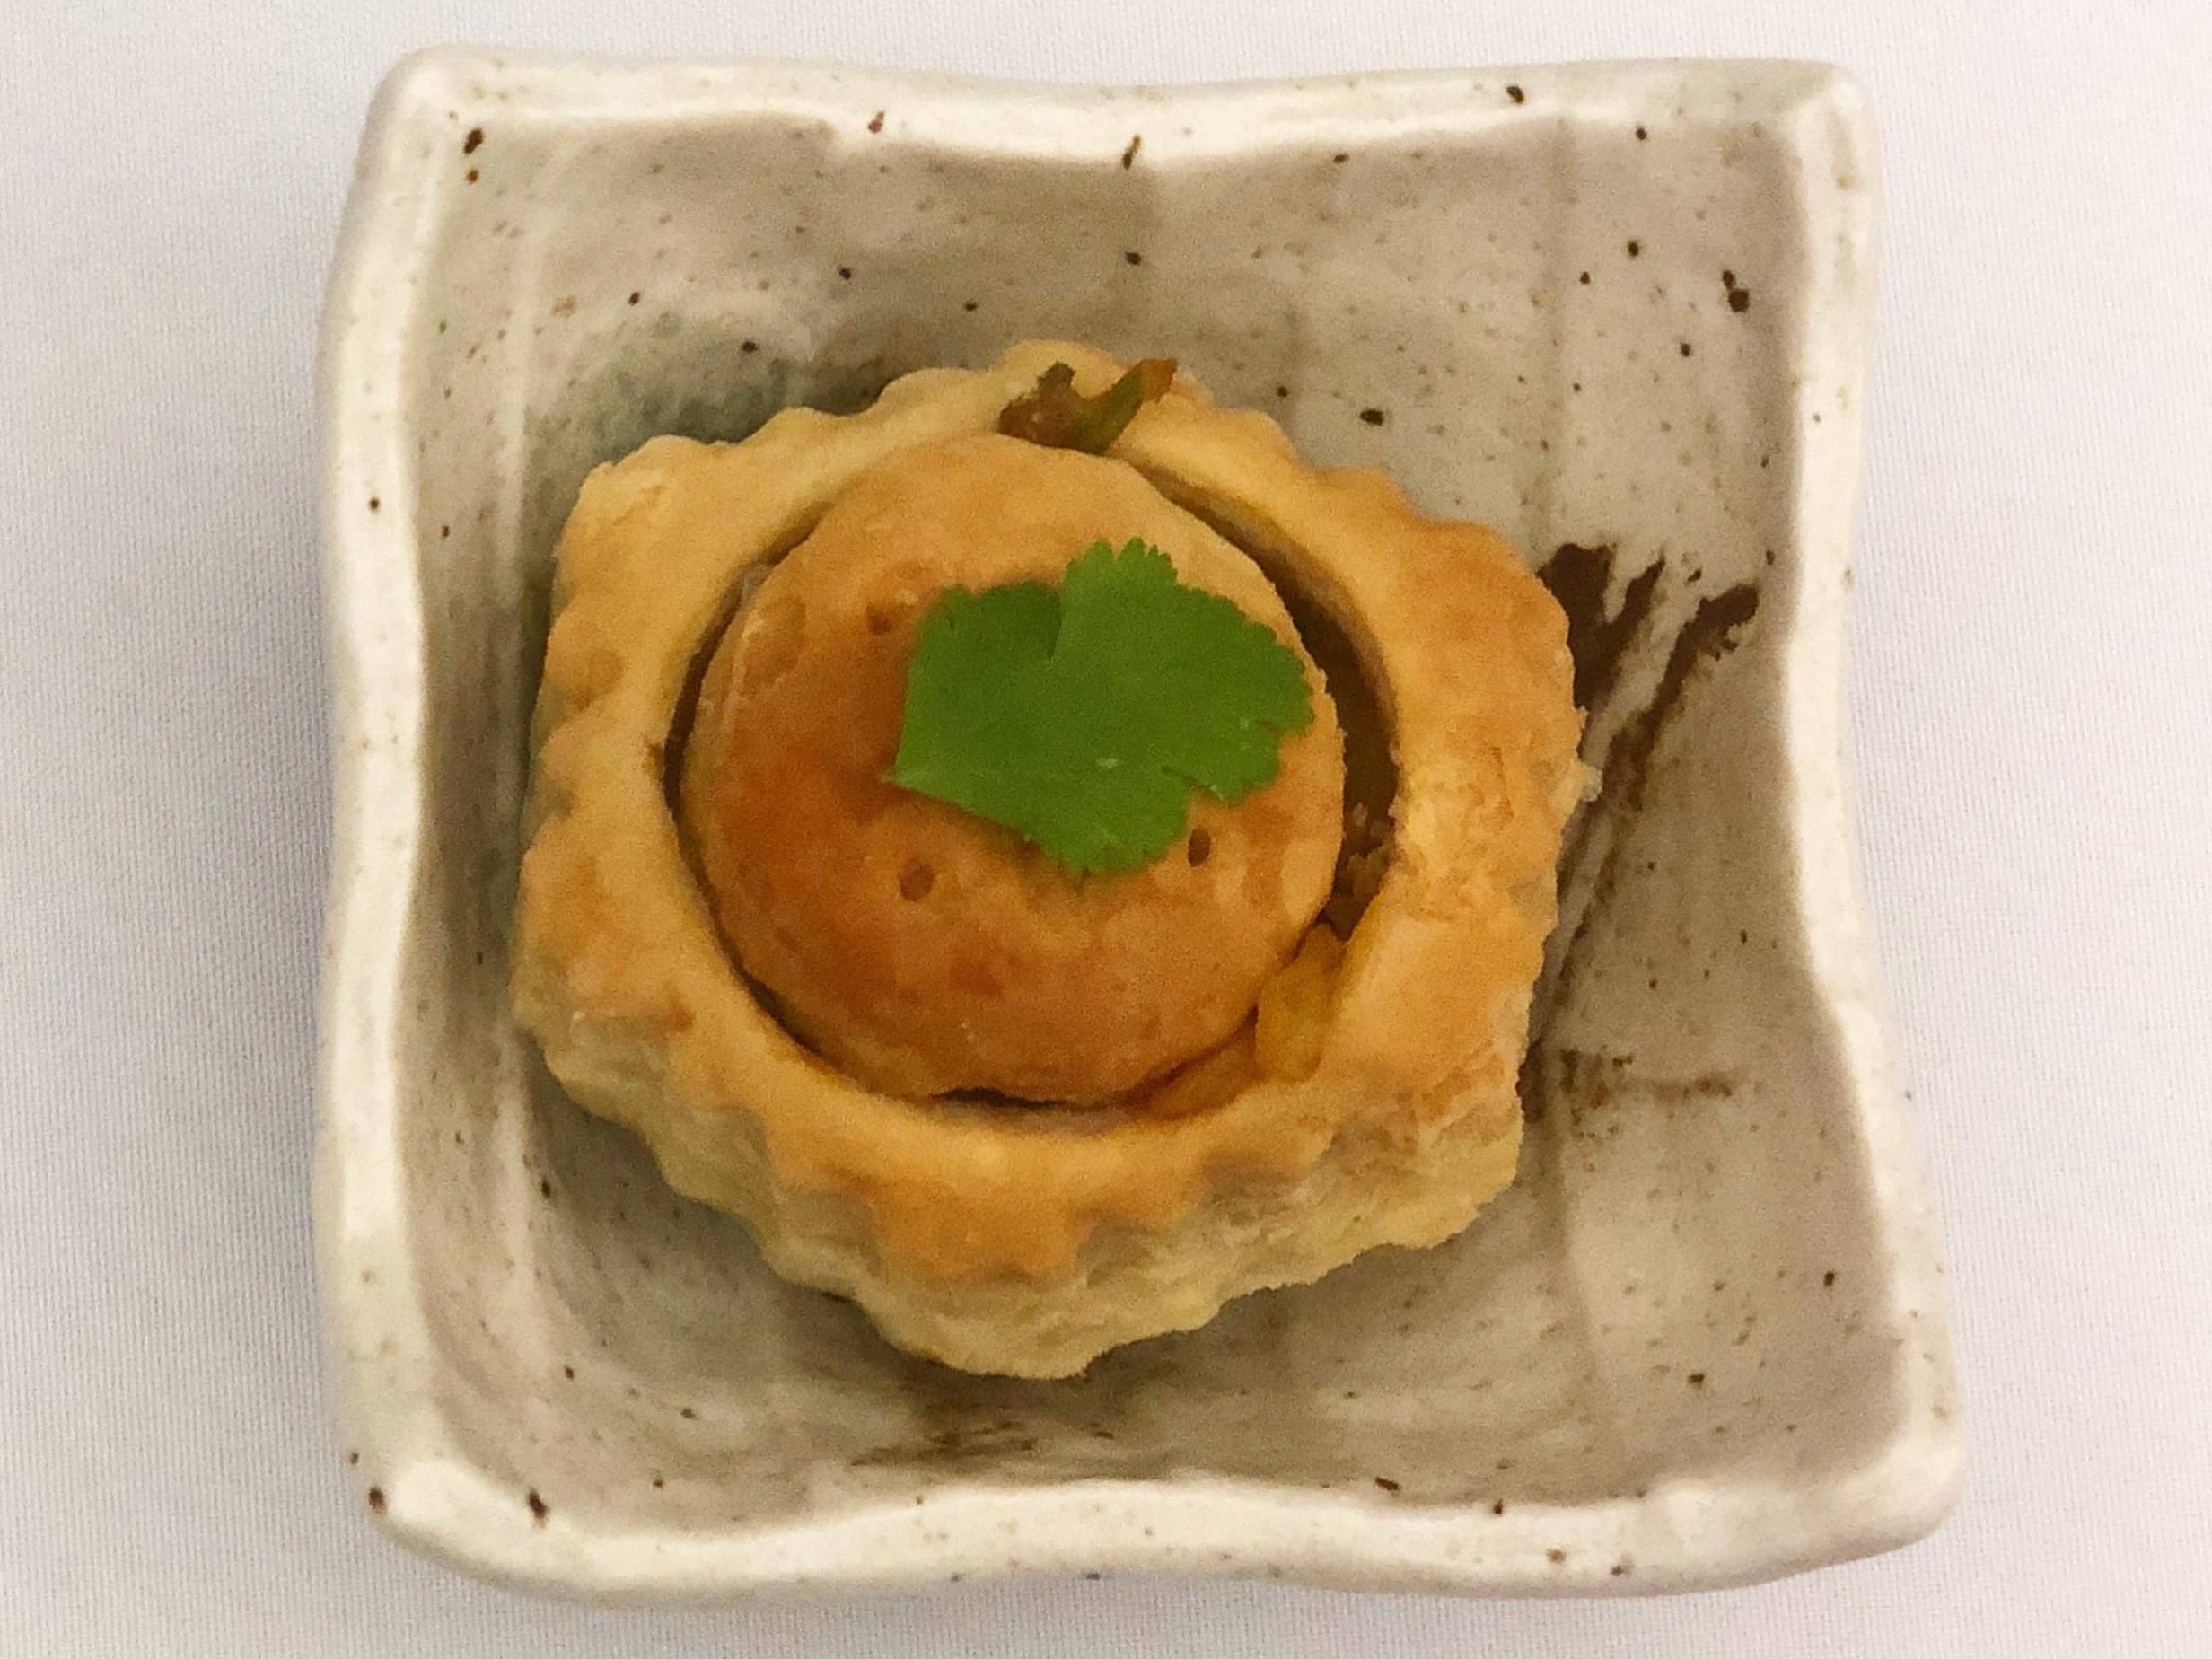 A vegetable puff pastry sits in a square plate. The puff is divided in the center as a circle with a small leaf on top. The plate is on a table with a white tablecloth. Photo by Alyssa Buckley.